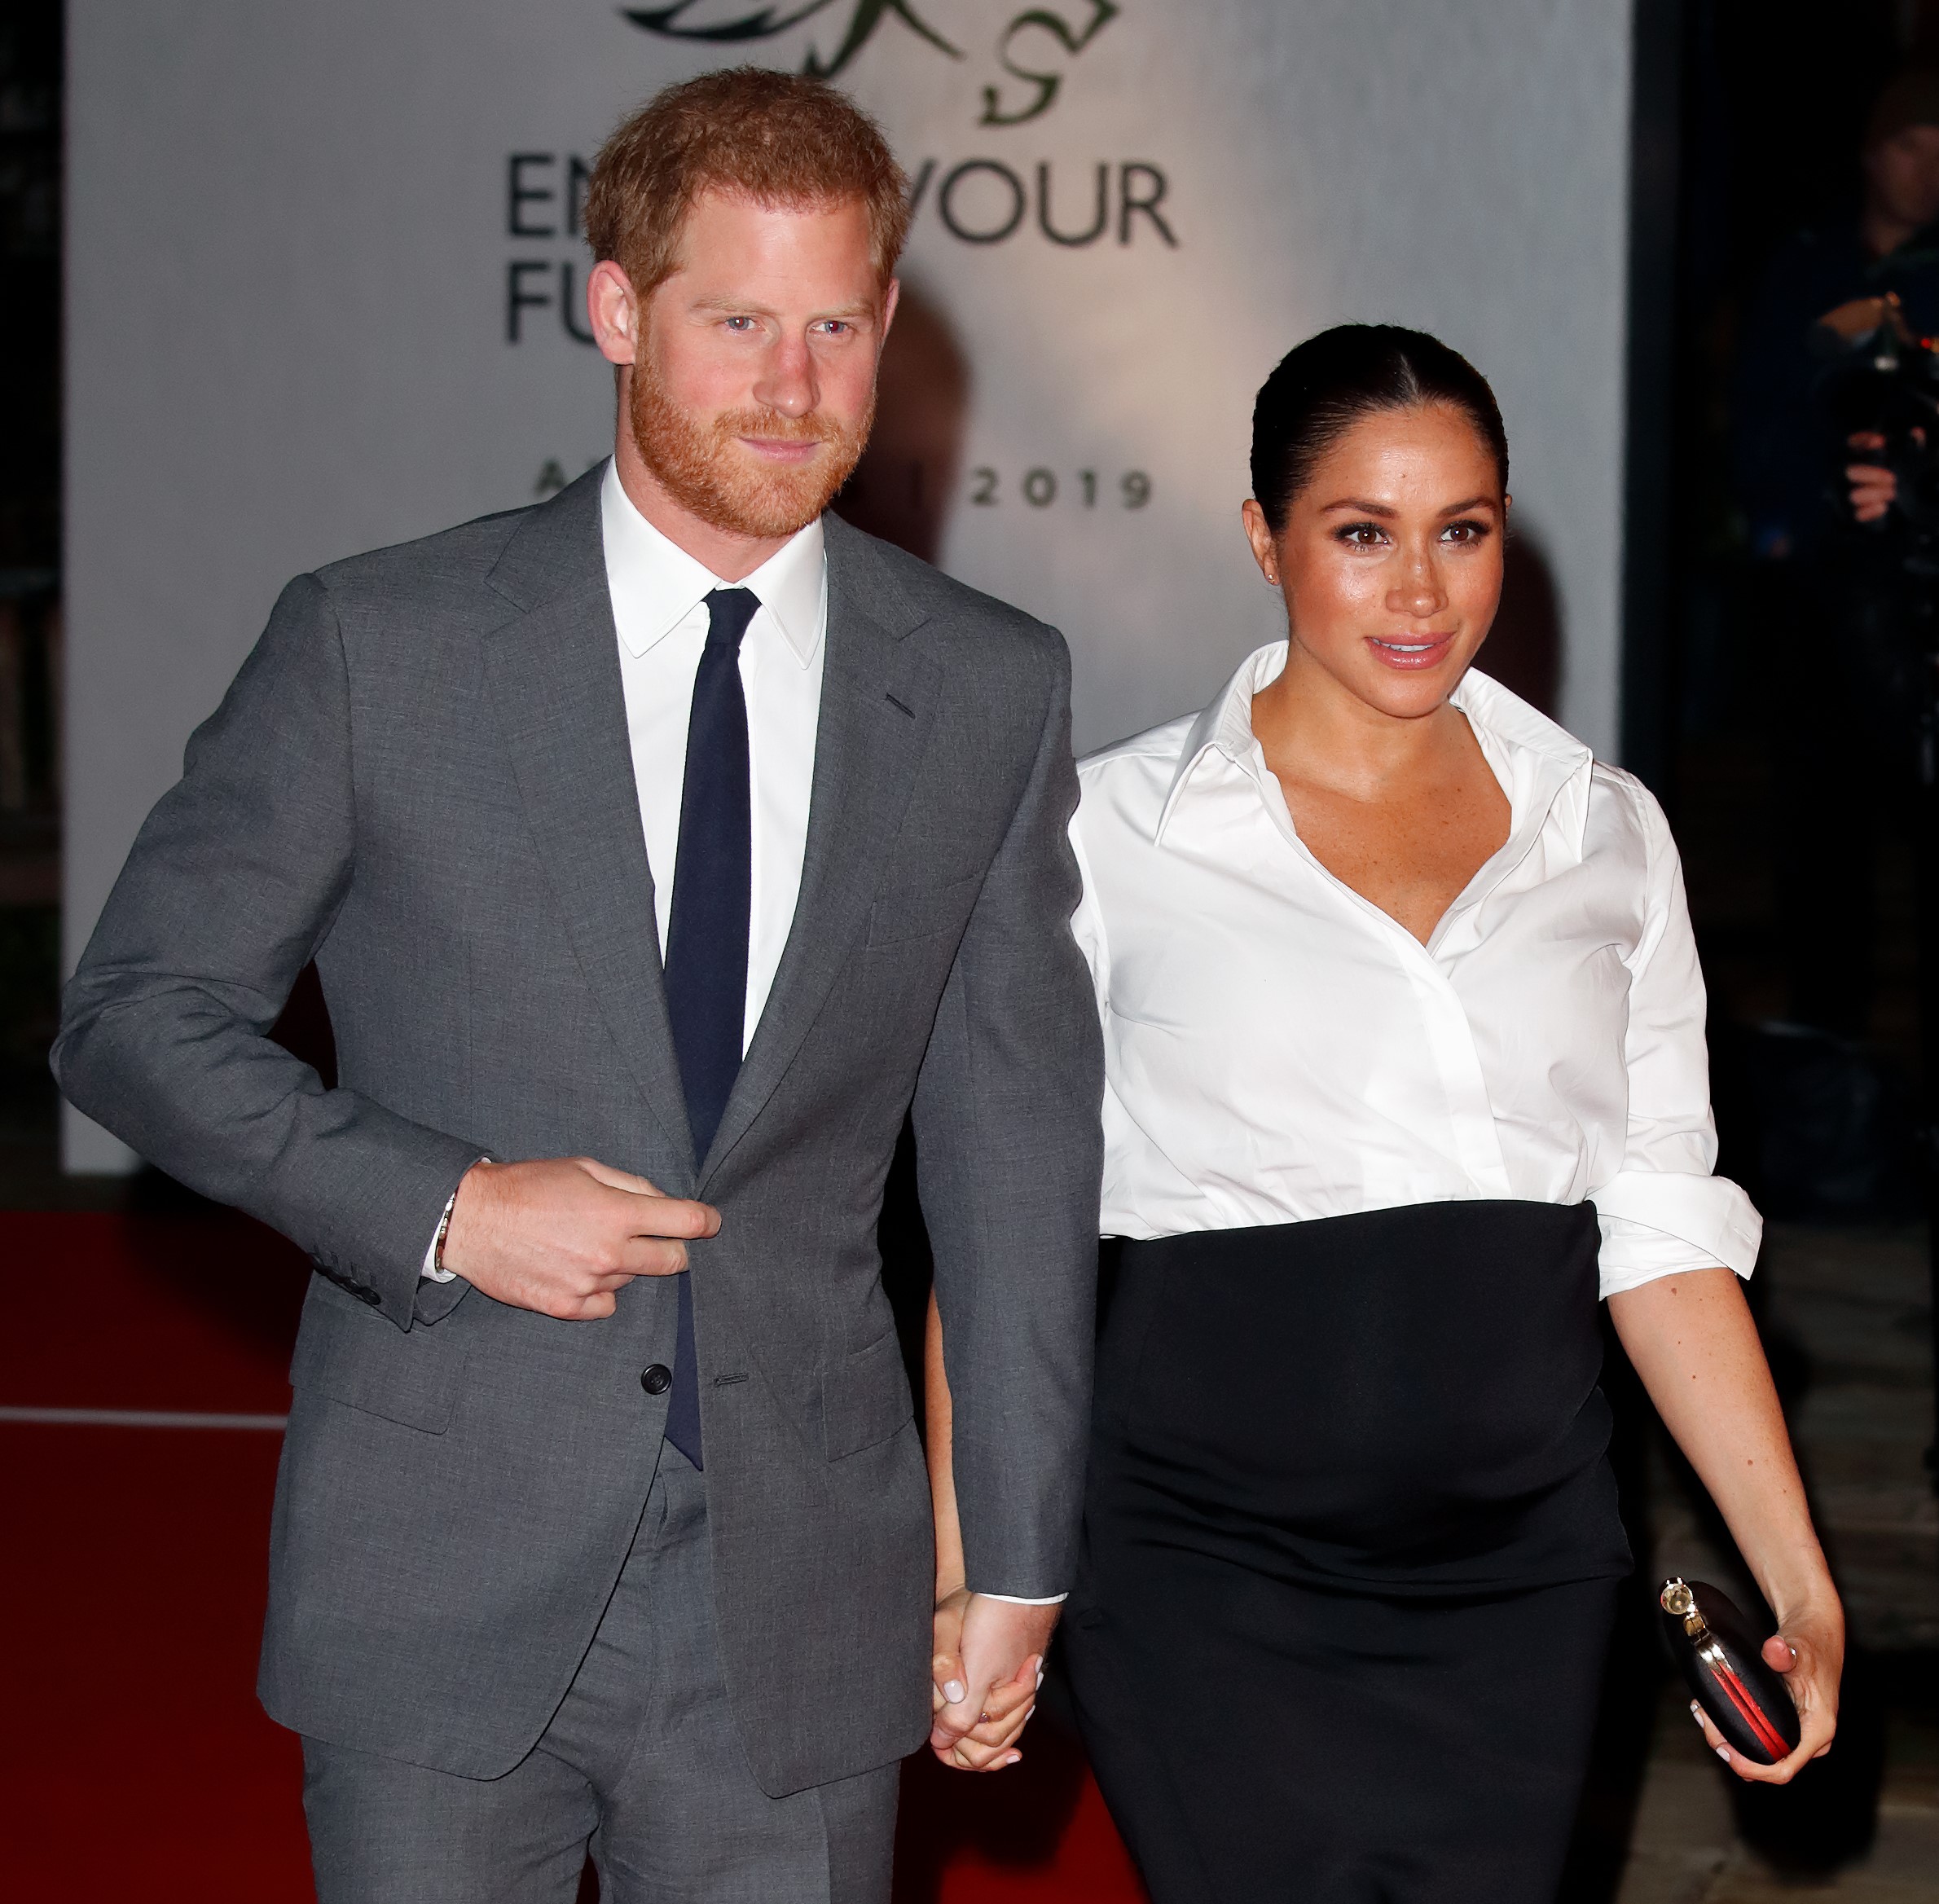 Prince Harry and Meghan Markle walking hand-in-hand at the Endeavour Fund Awards